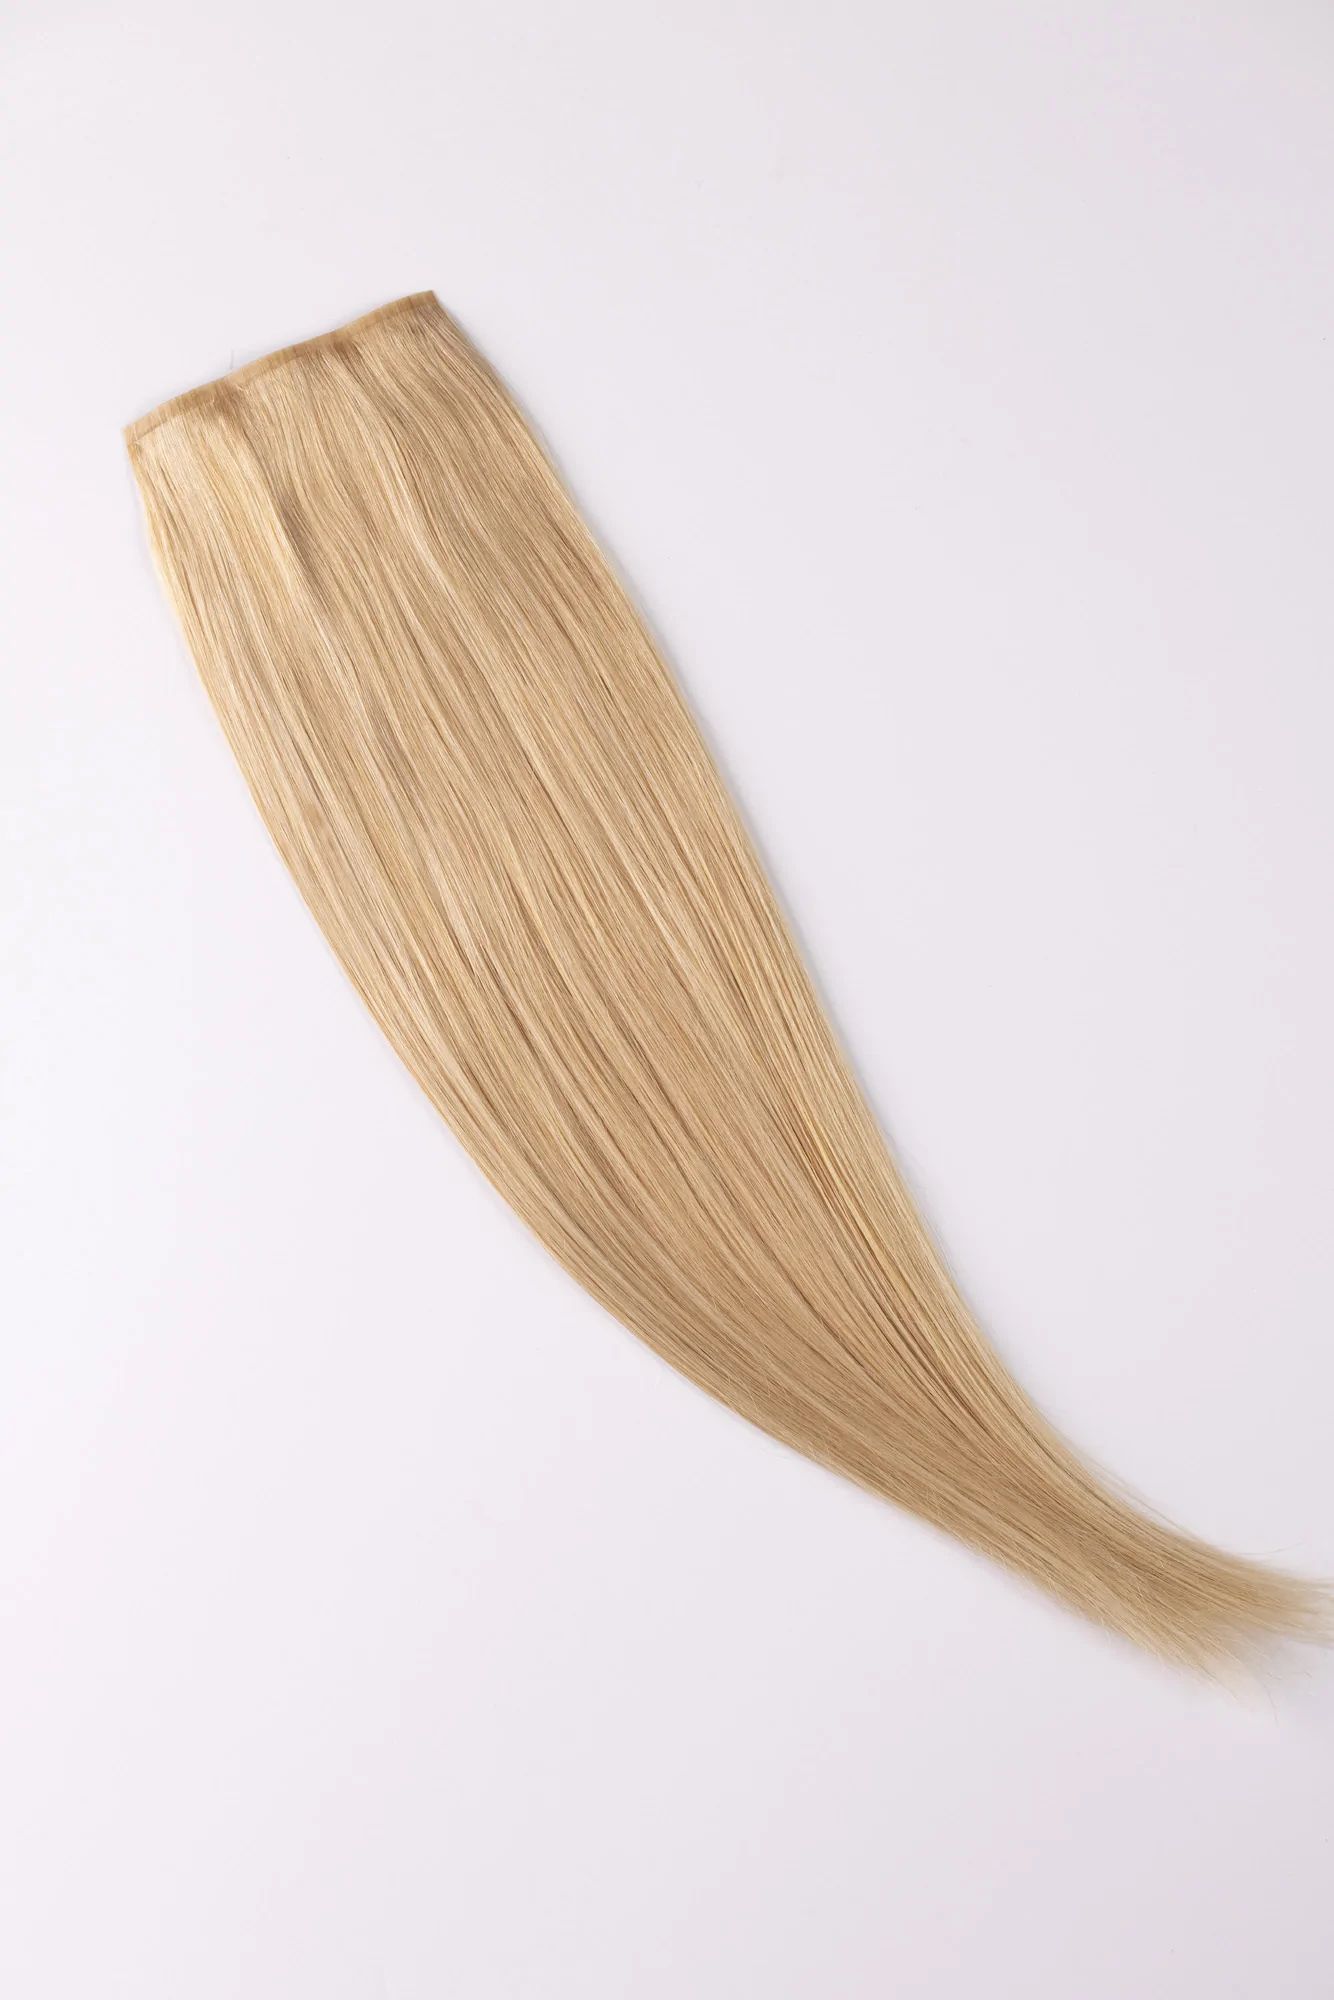 BFB | The Up - Clip In Remy Hair Extensions - For Updos - Warm Blonde | Barefoot Blonde Hair